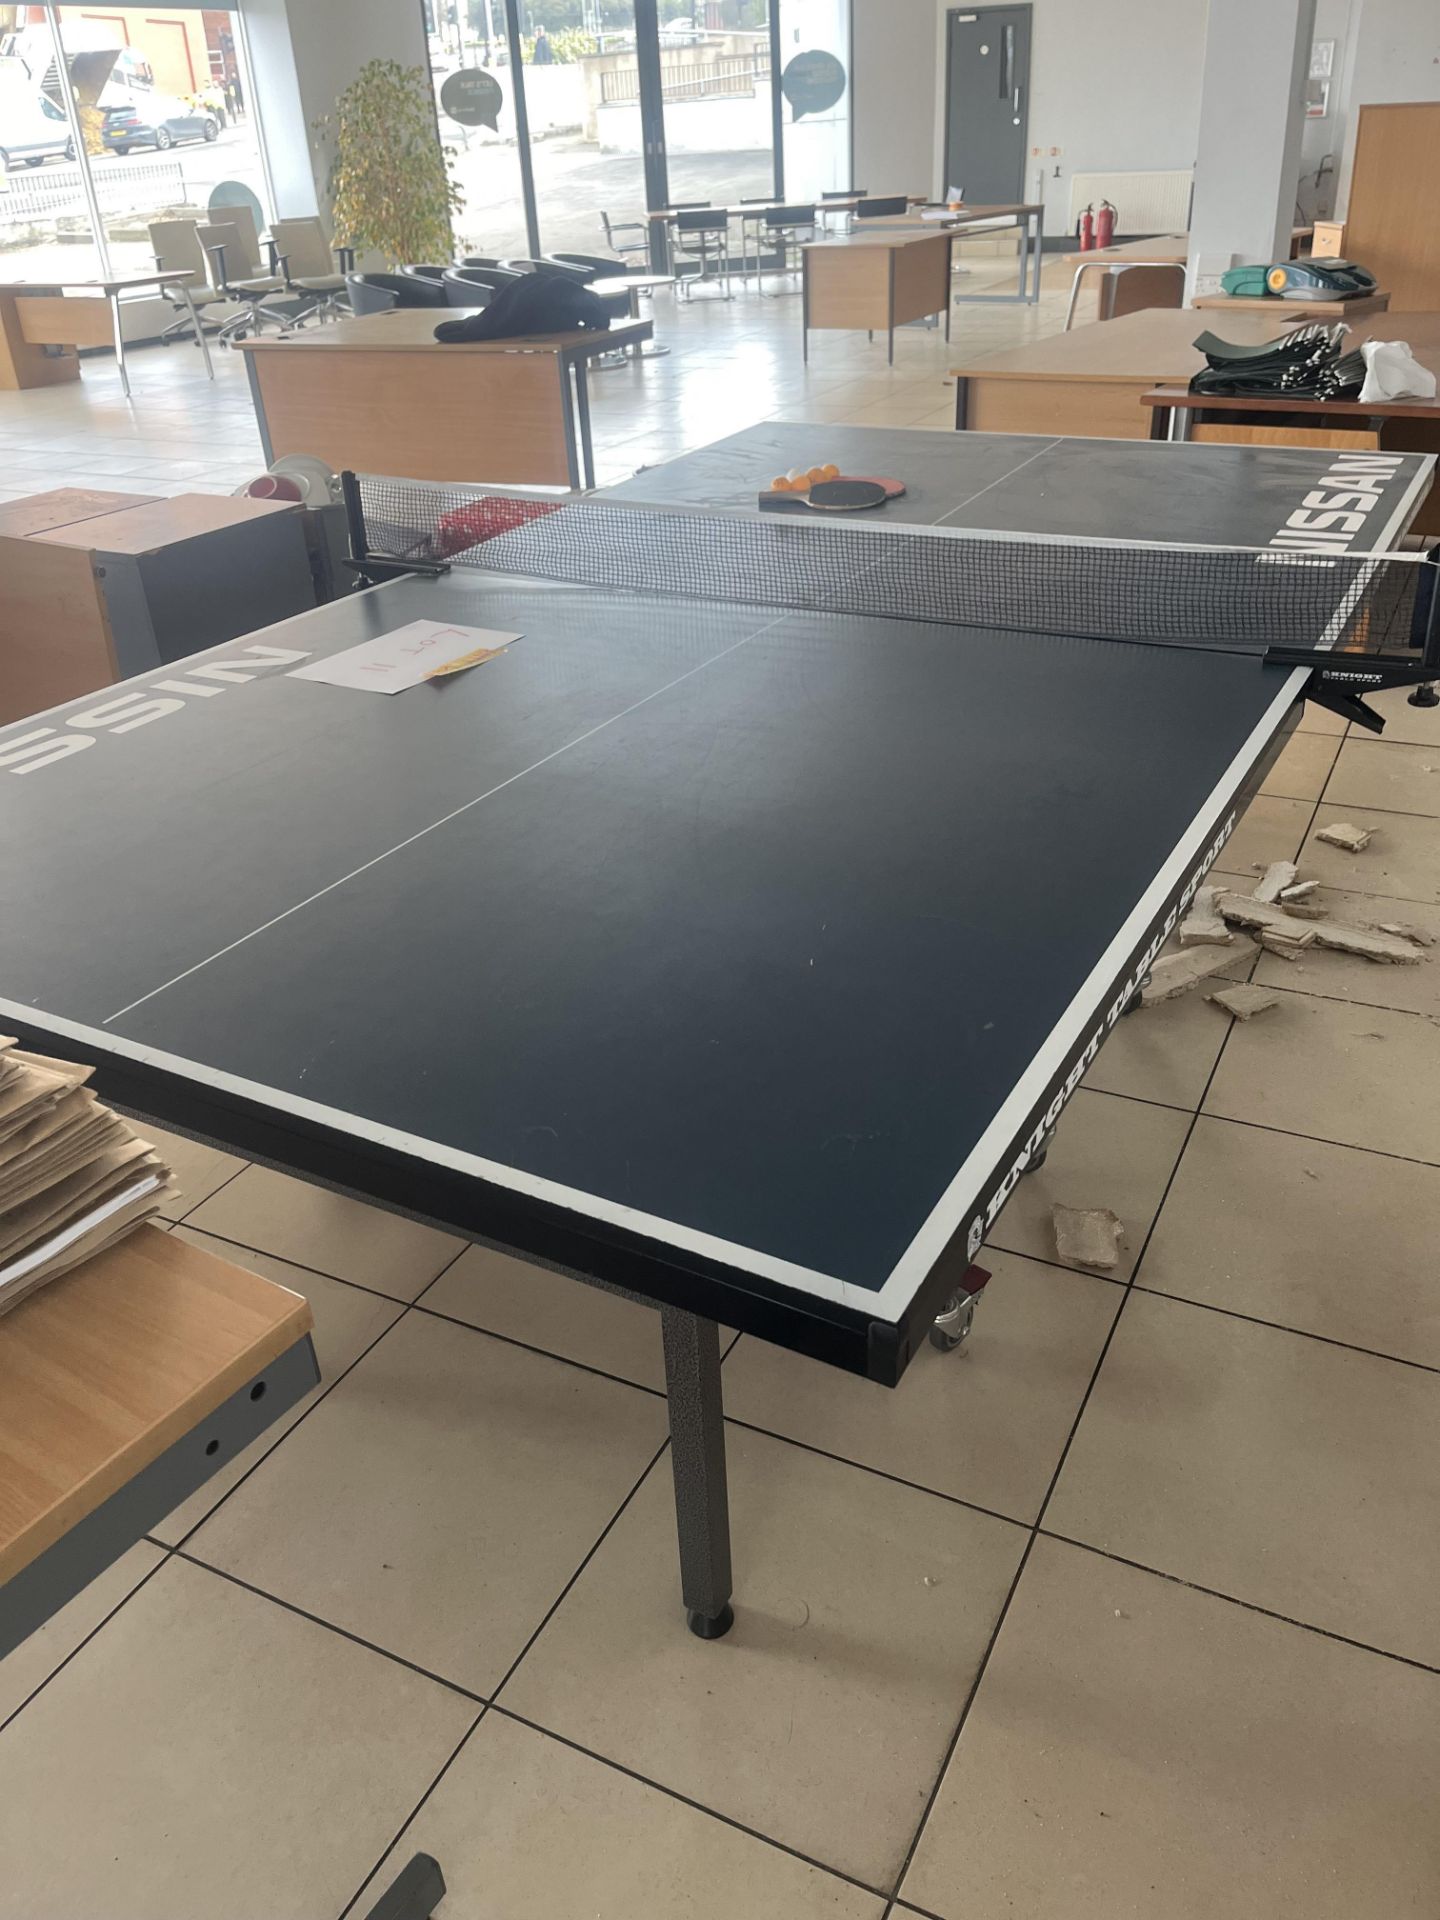 Nissan fold away table tennis table complete with two bats and four balls - Image 8 of 8